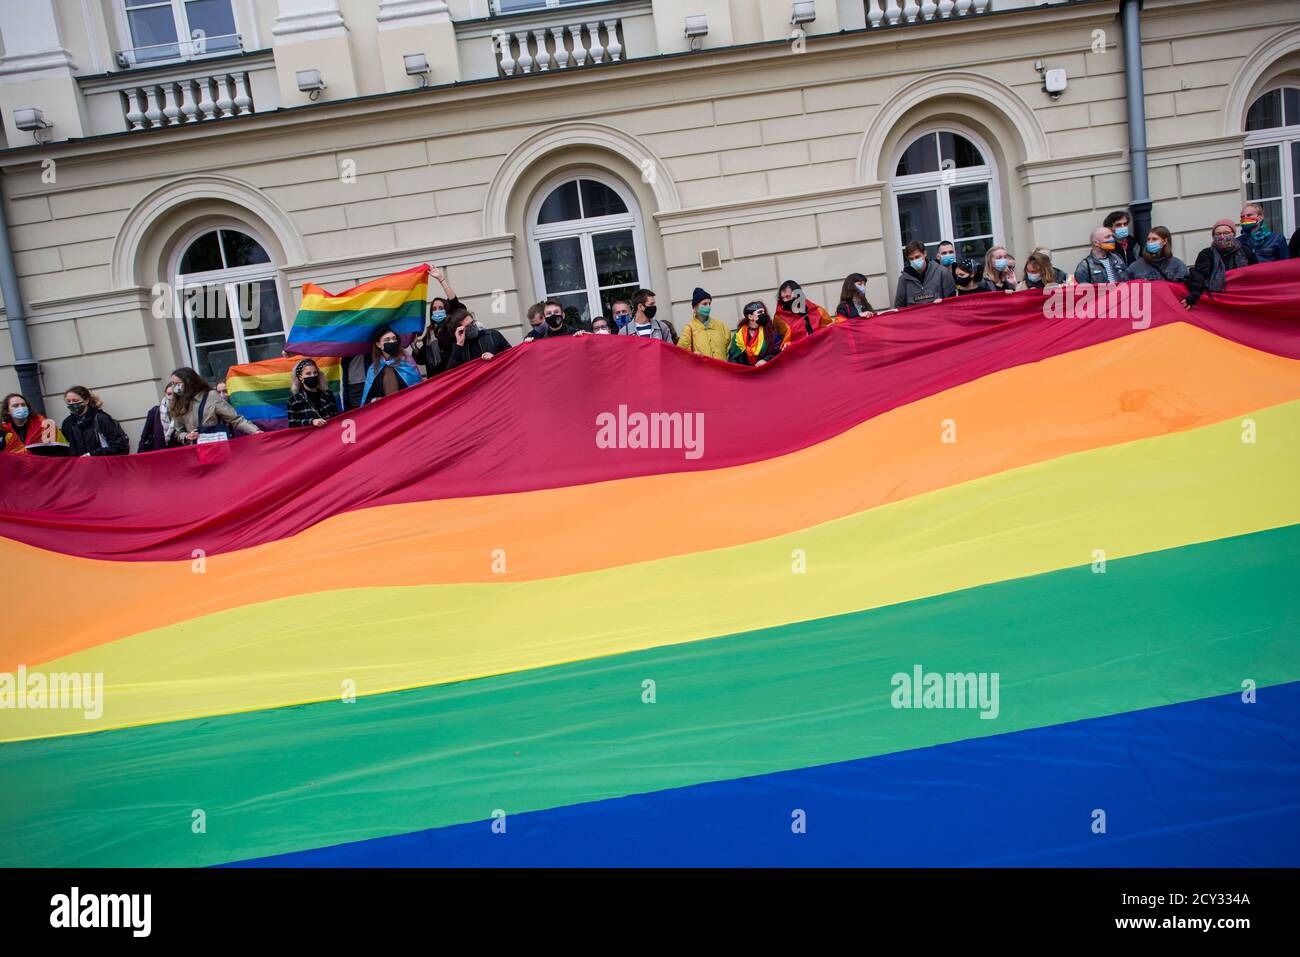 Activists hold a massive rainbow flag at the university campus during the protest.At the Warsaw University (UW, Uniwersytet Warszawski) students protested against the visit of the President Andrzej Duda on the occasion of the inauguration of the academic year. The Students' Antifascist Committee (Studencki Komitet Antyfaszystowski) who organized the protest claimed, that there is no place at the Warsaw University for Andrzej Duda, who during his election campaign openly dehumanized LGBTQ people, describing it as  an 'ideology'. The event took place in the time of growing hate speech against LG Stock Photo